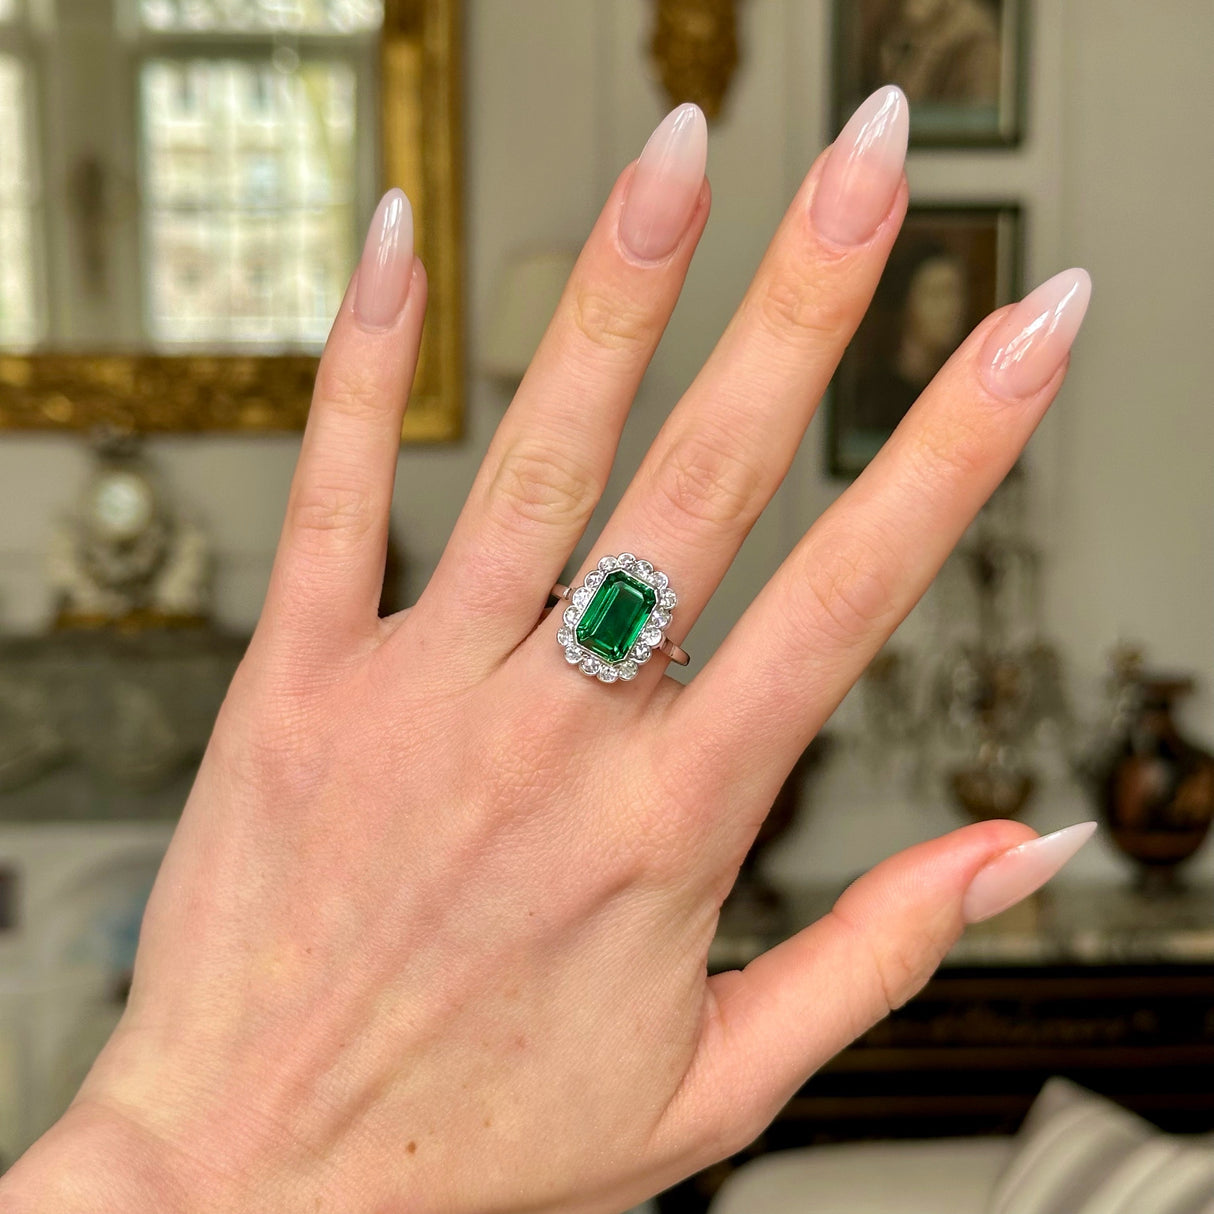 Antique green paste and diamond cluster ring, worn on hand. 